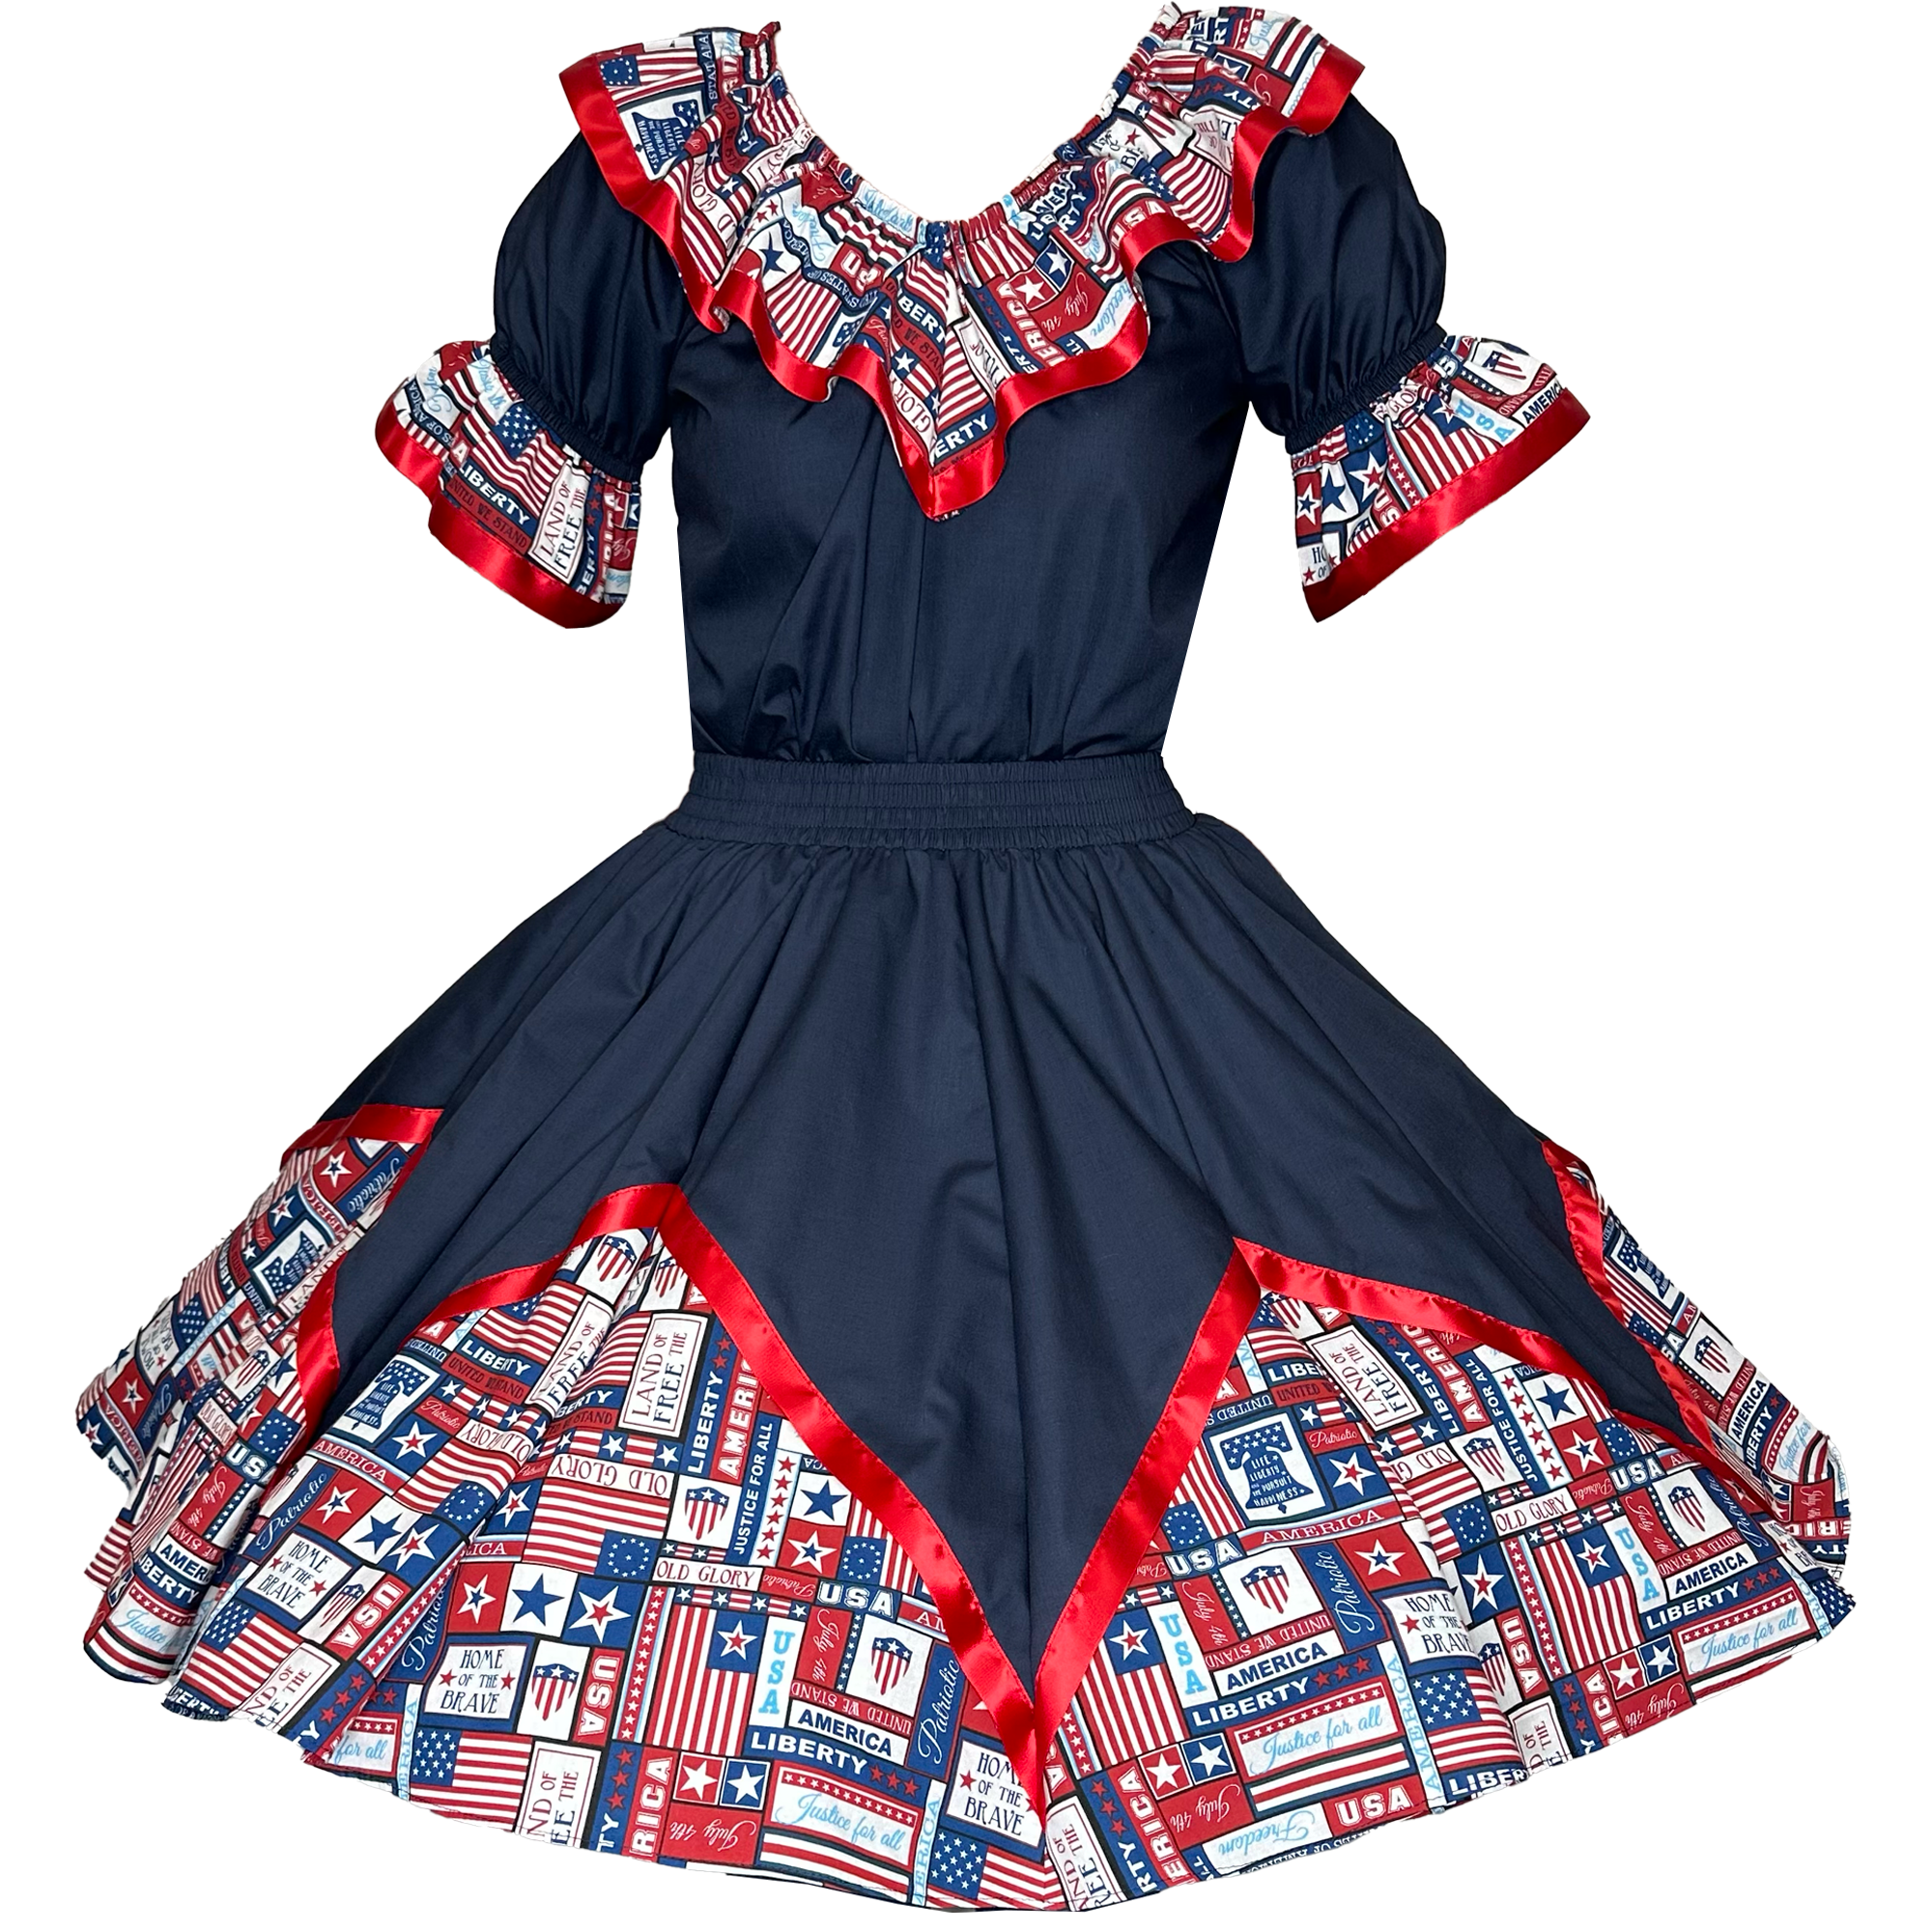 The Square Up Fashions July 4th Outfit is a navy blue dress with a patriotic print of red, white, and blue stars and stripes. The dress features a ruffled neckline, puffed sleeves with ruffle trims, and a flared 12-gore skirt with a triangular patterned hem.